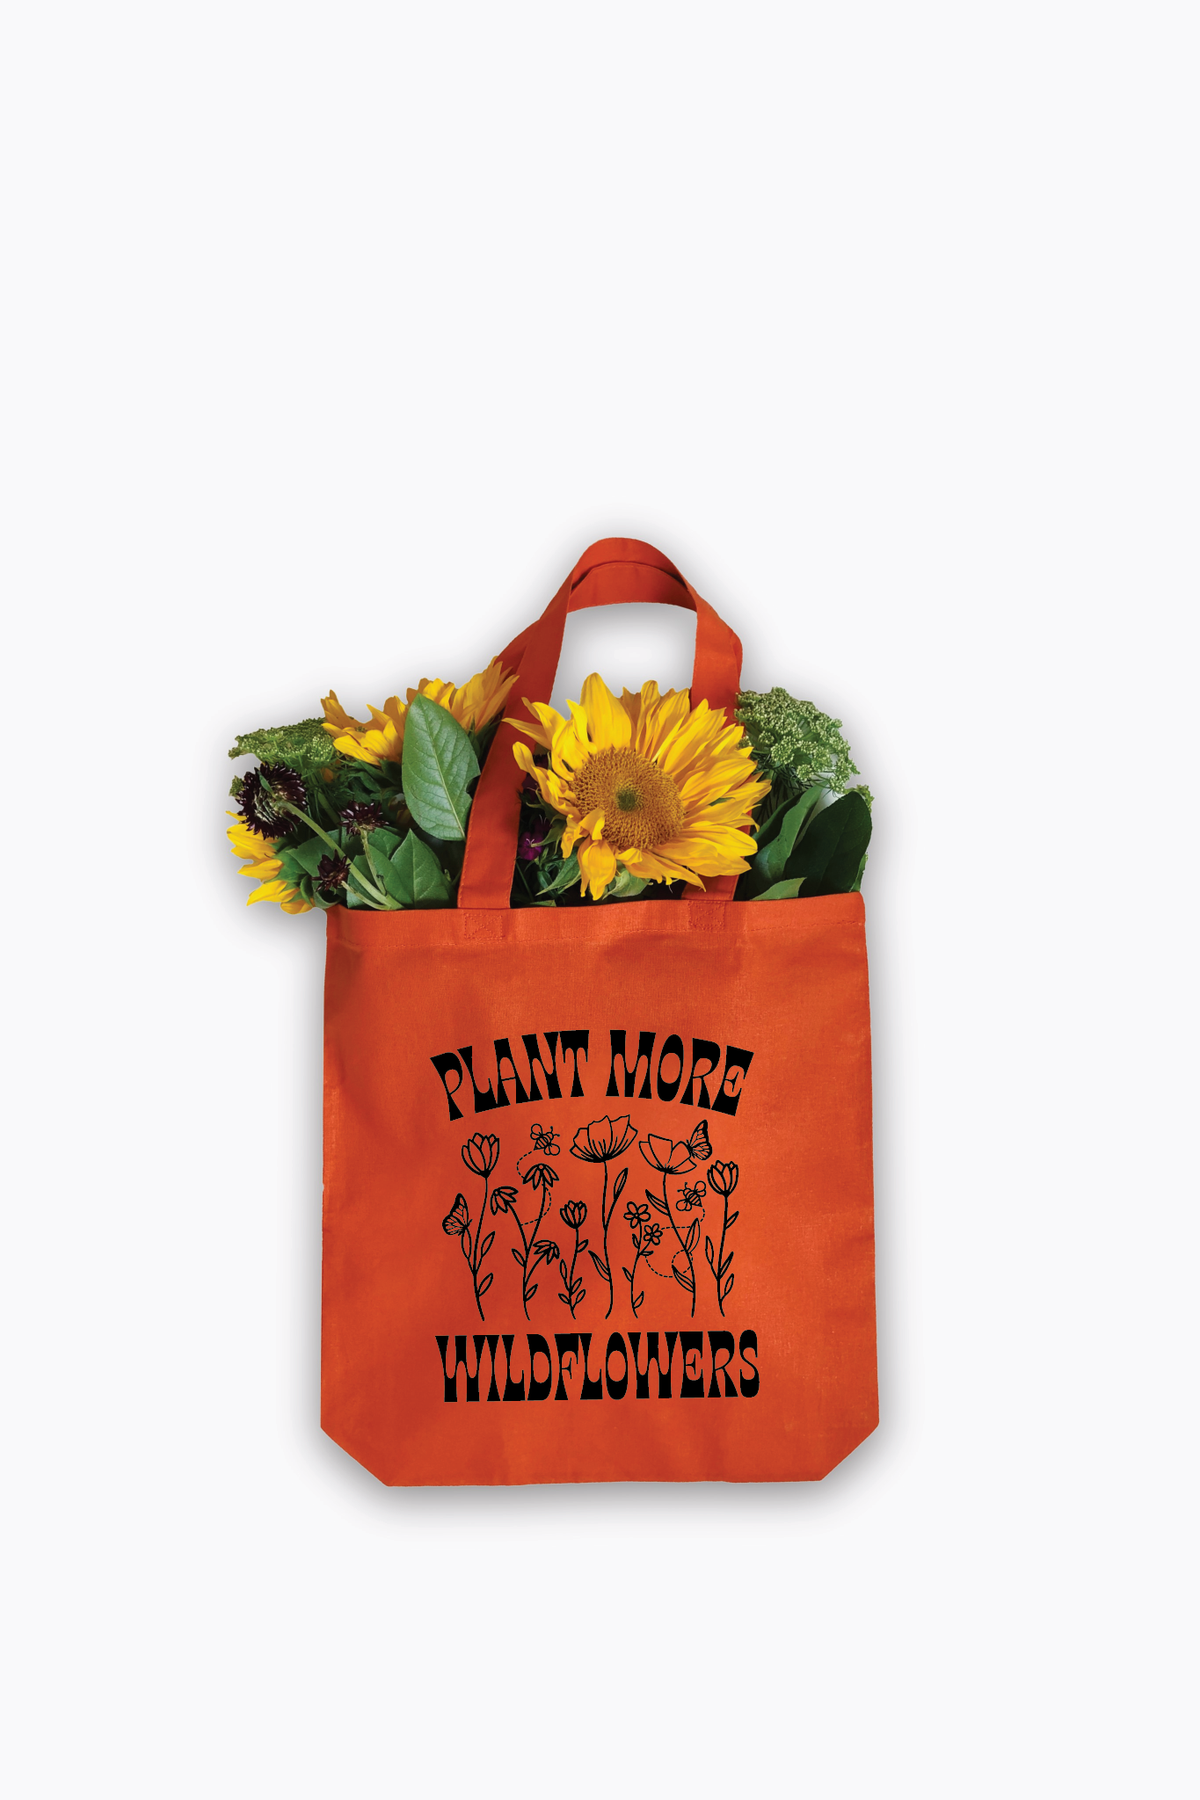 Plant More Wildflowers Tote Bag